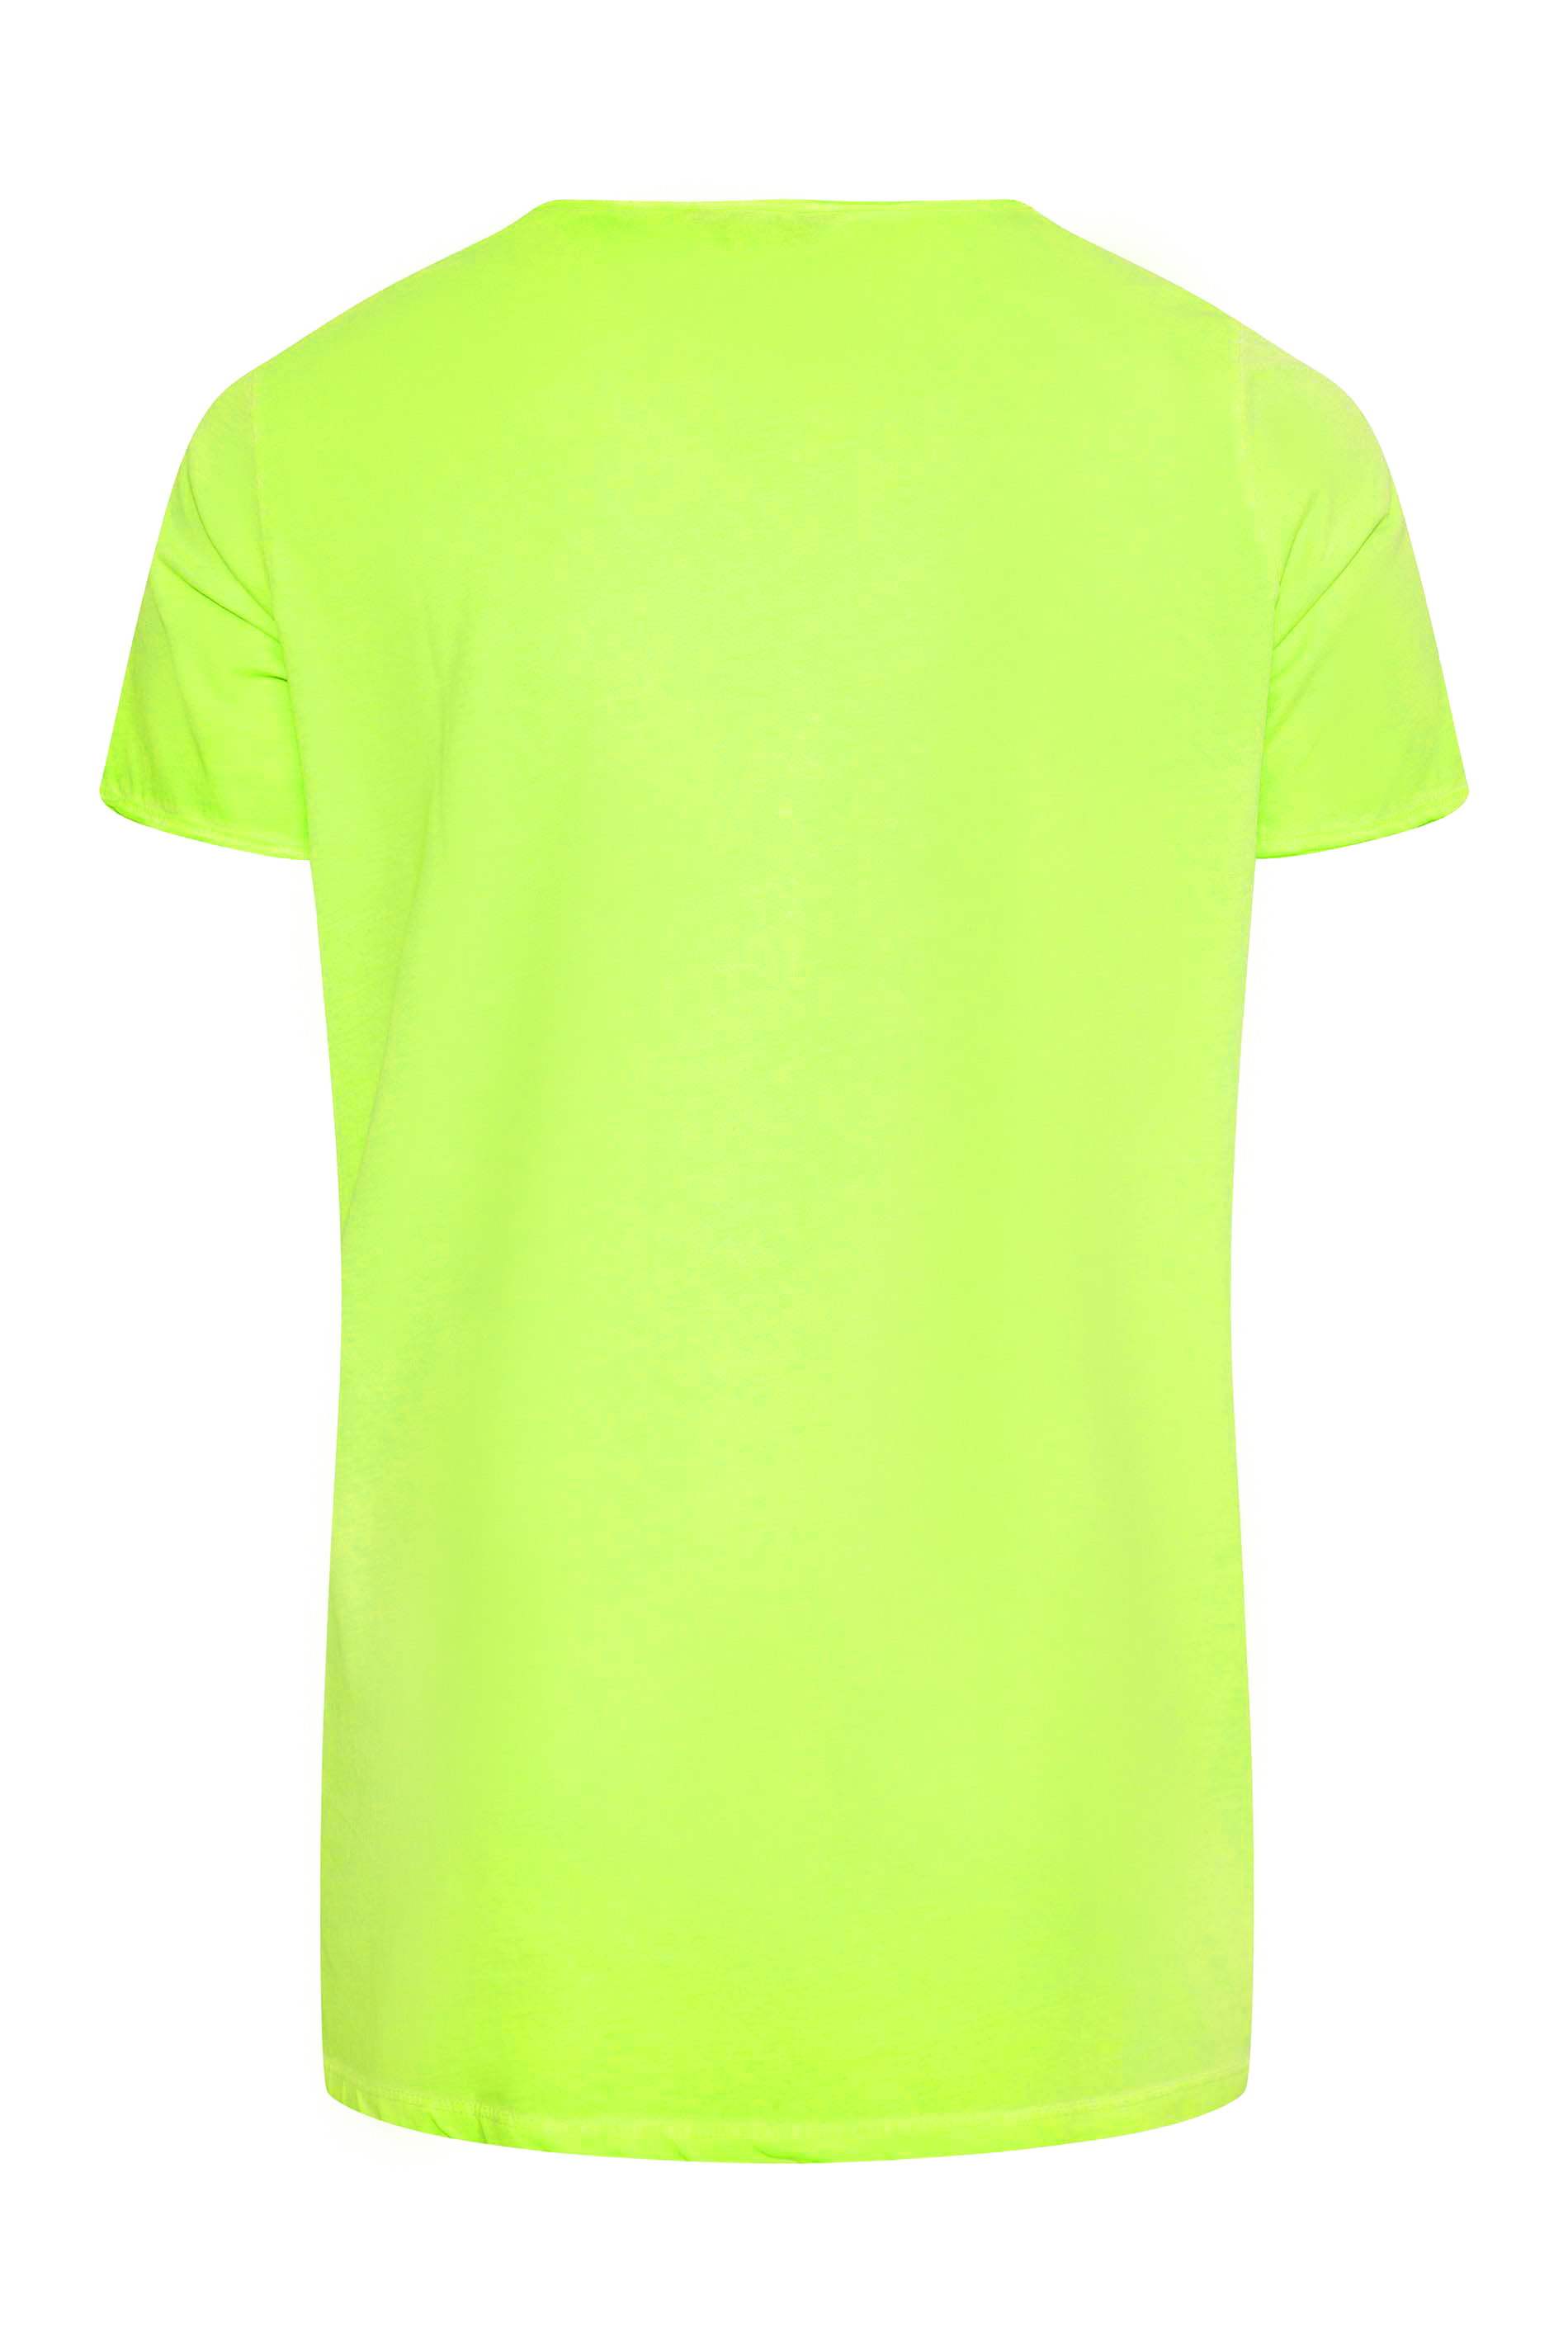 Grande taille  Tops Grande taille  T-Shirts | T-Shirt Vert Citron 'Charm' - FW19907